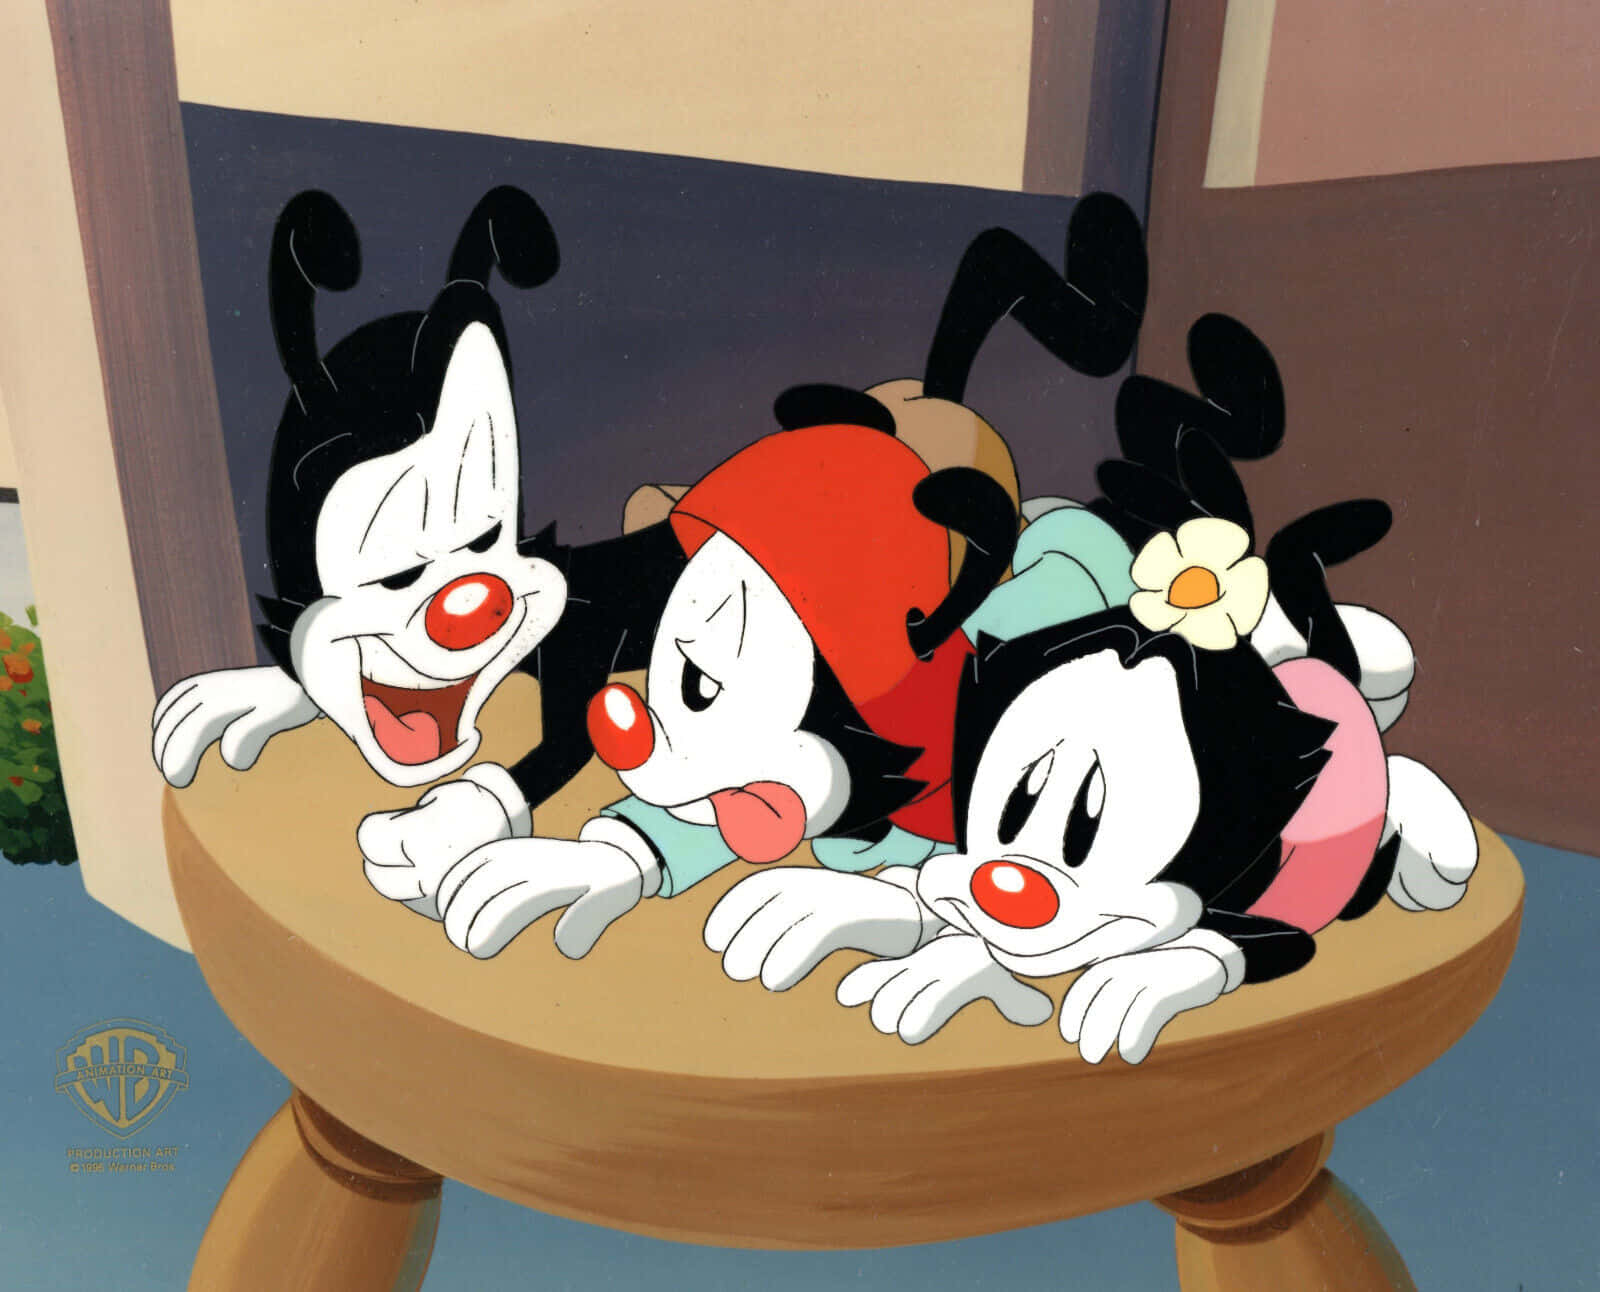 Dot, Wakko and Yakko getting ready for another fun-filled day of antics